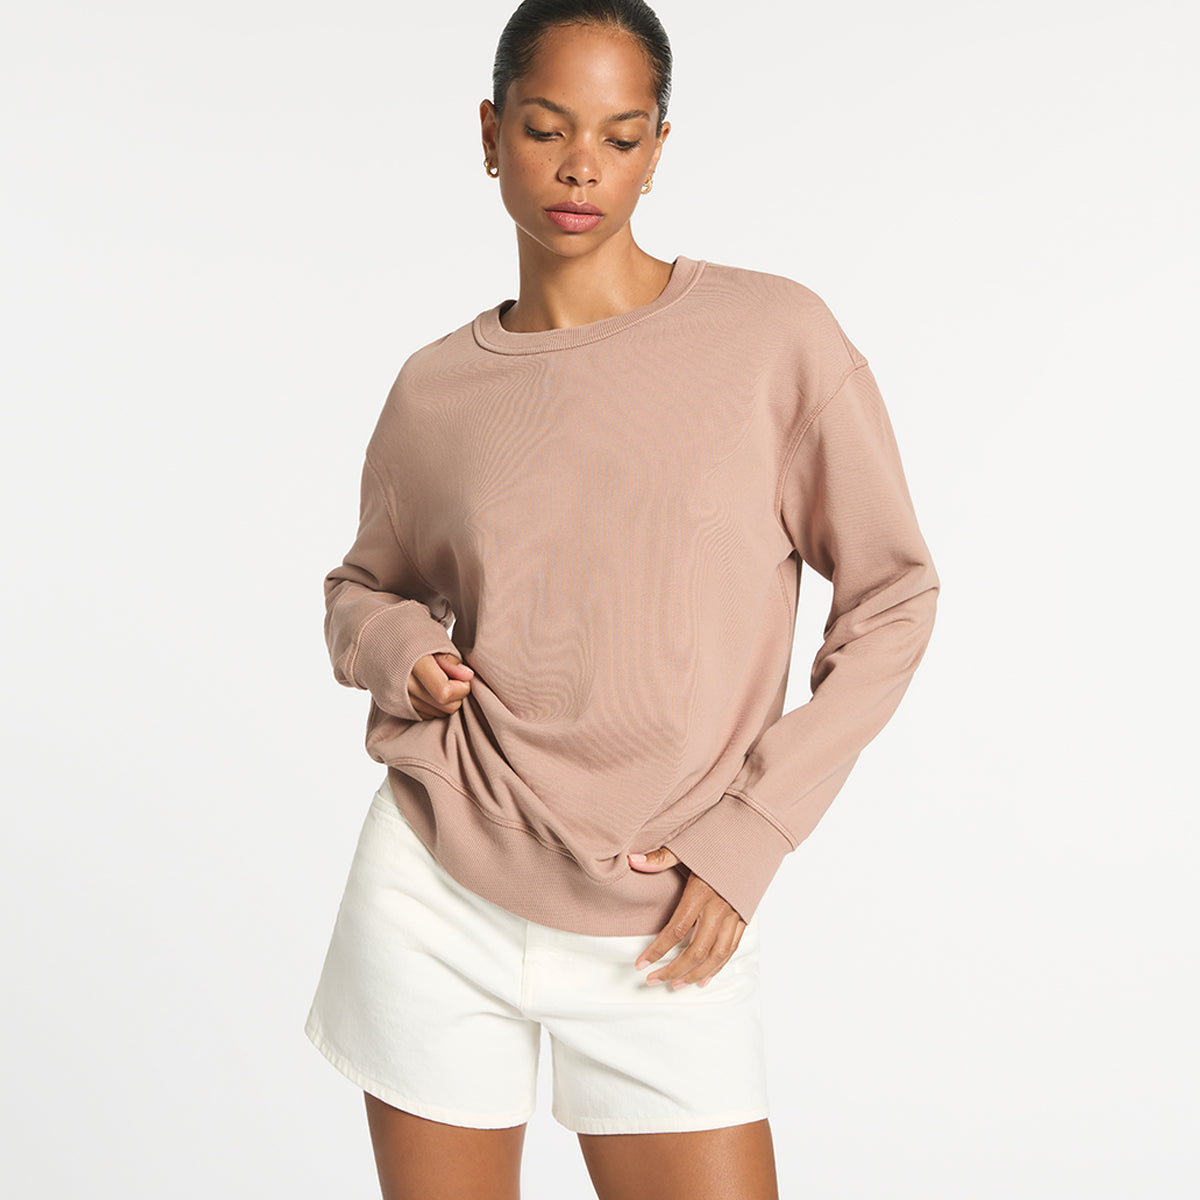 Could Be Nice Classic Crew - Dusty Rose